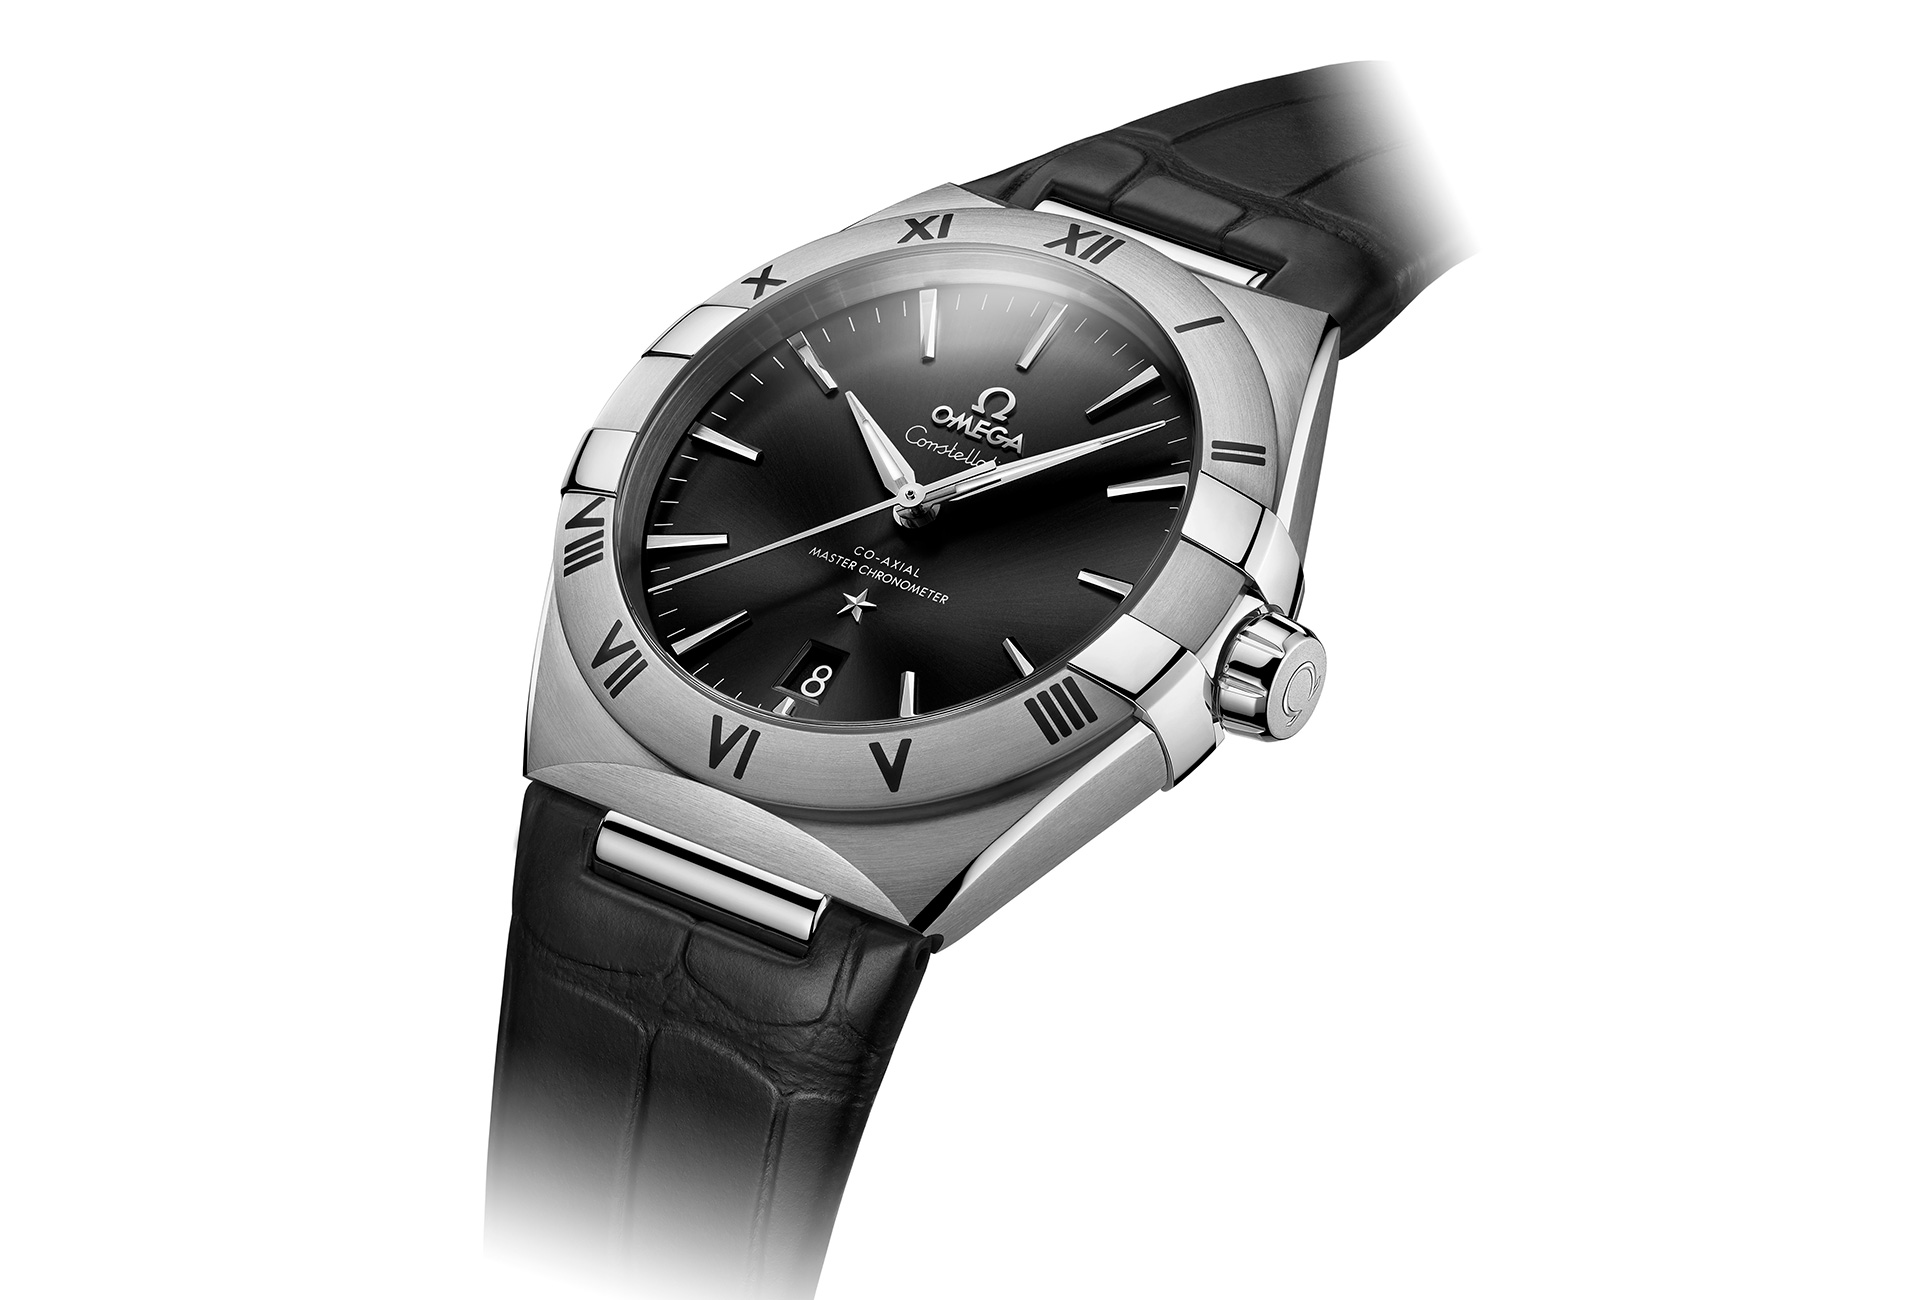 The new Omega Constellation Gents 